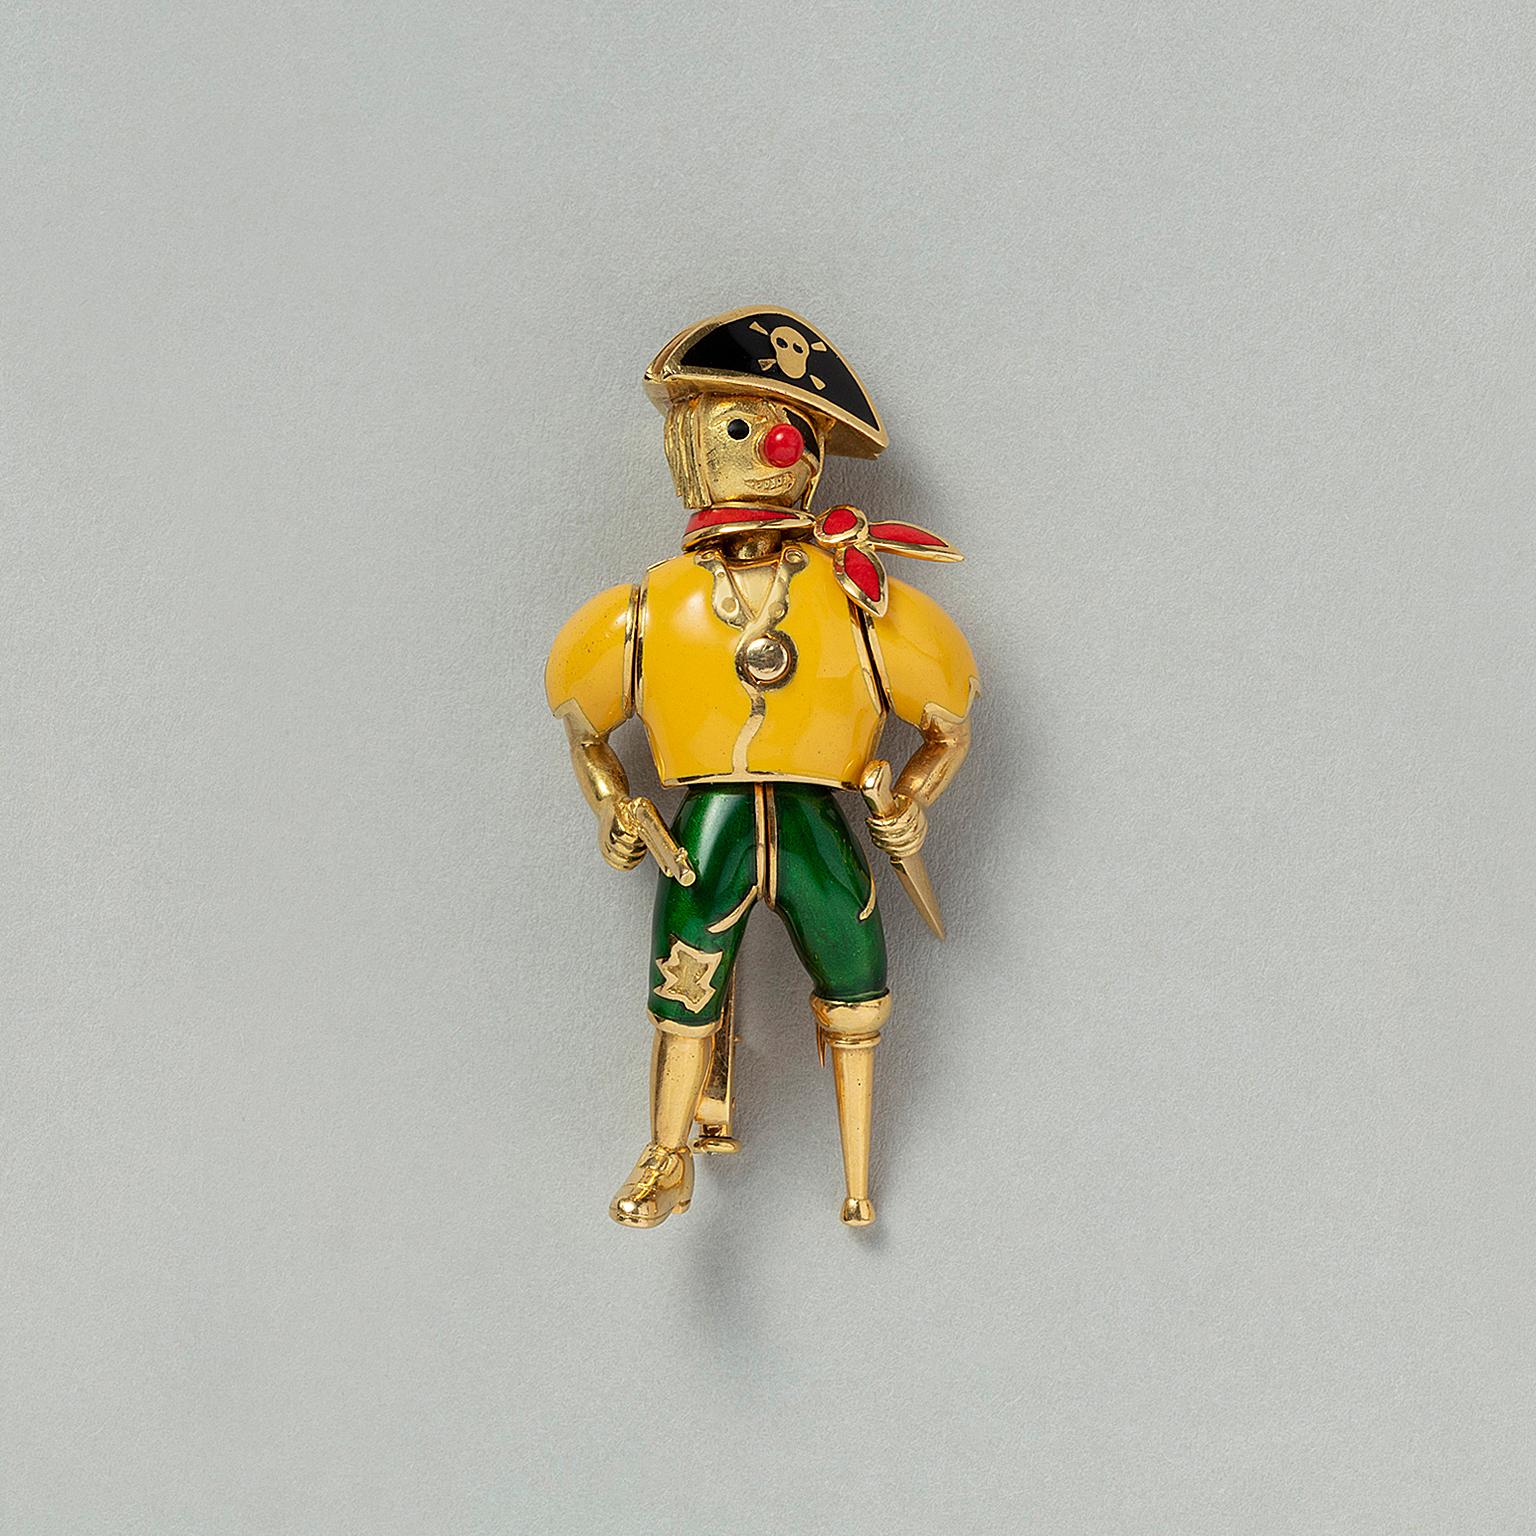 An articulate 18 carat yellow gold brooch of a pirate with a yellow enamel shirt, green trousers a red scarf and a black stitch with a skull, he is carrying a gun and a knife and has a wooden leg, France, circa 1970.

weight: 23.55 grams
dimensions: